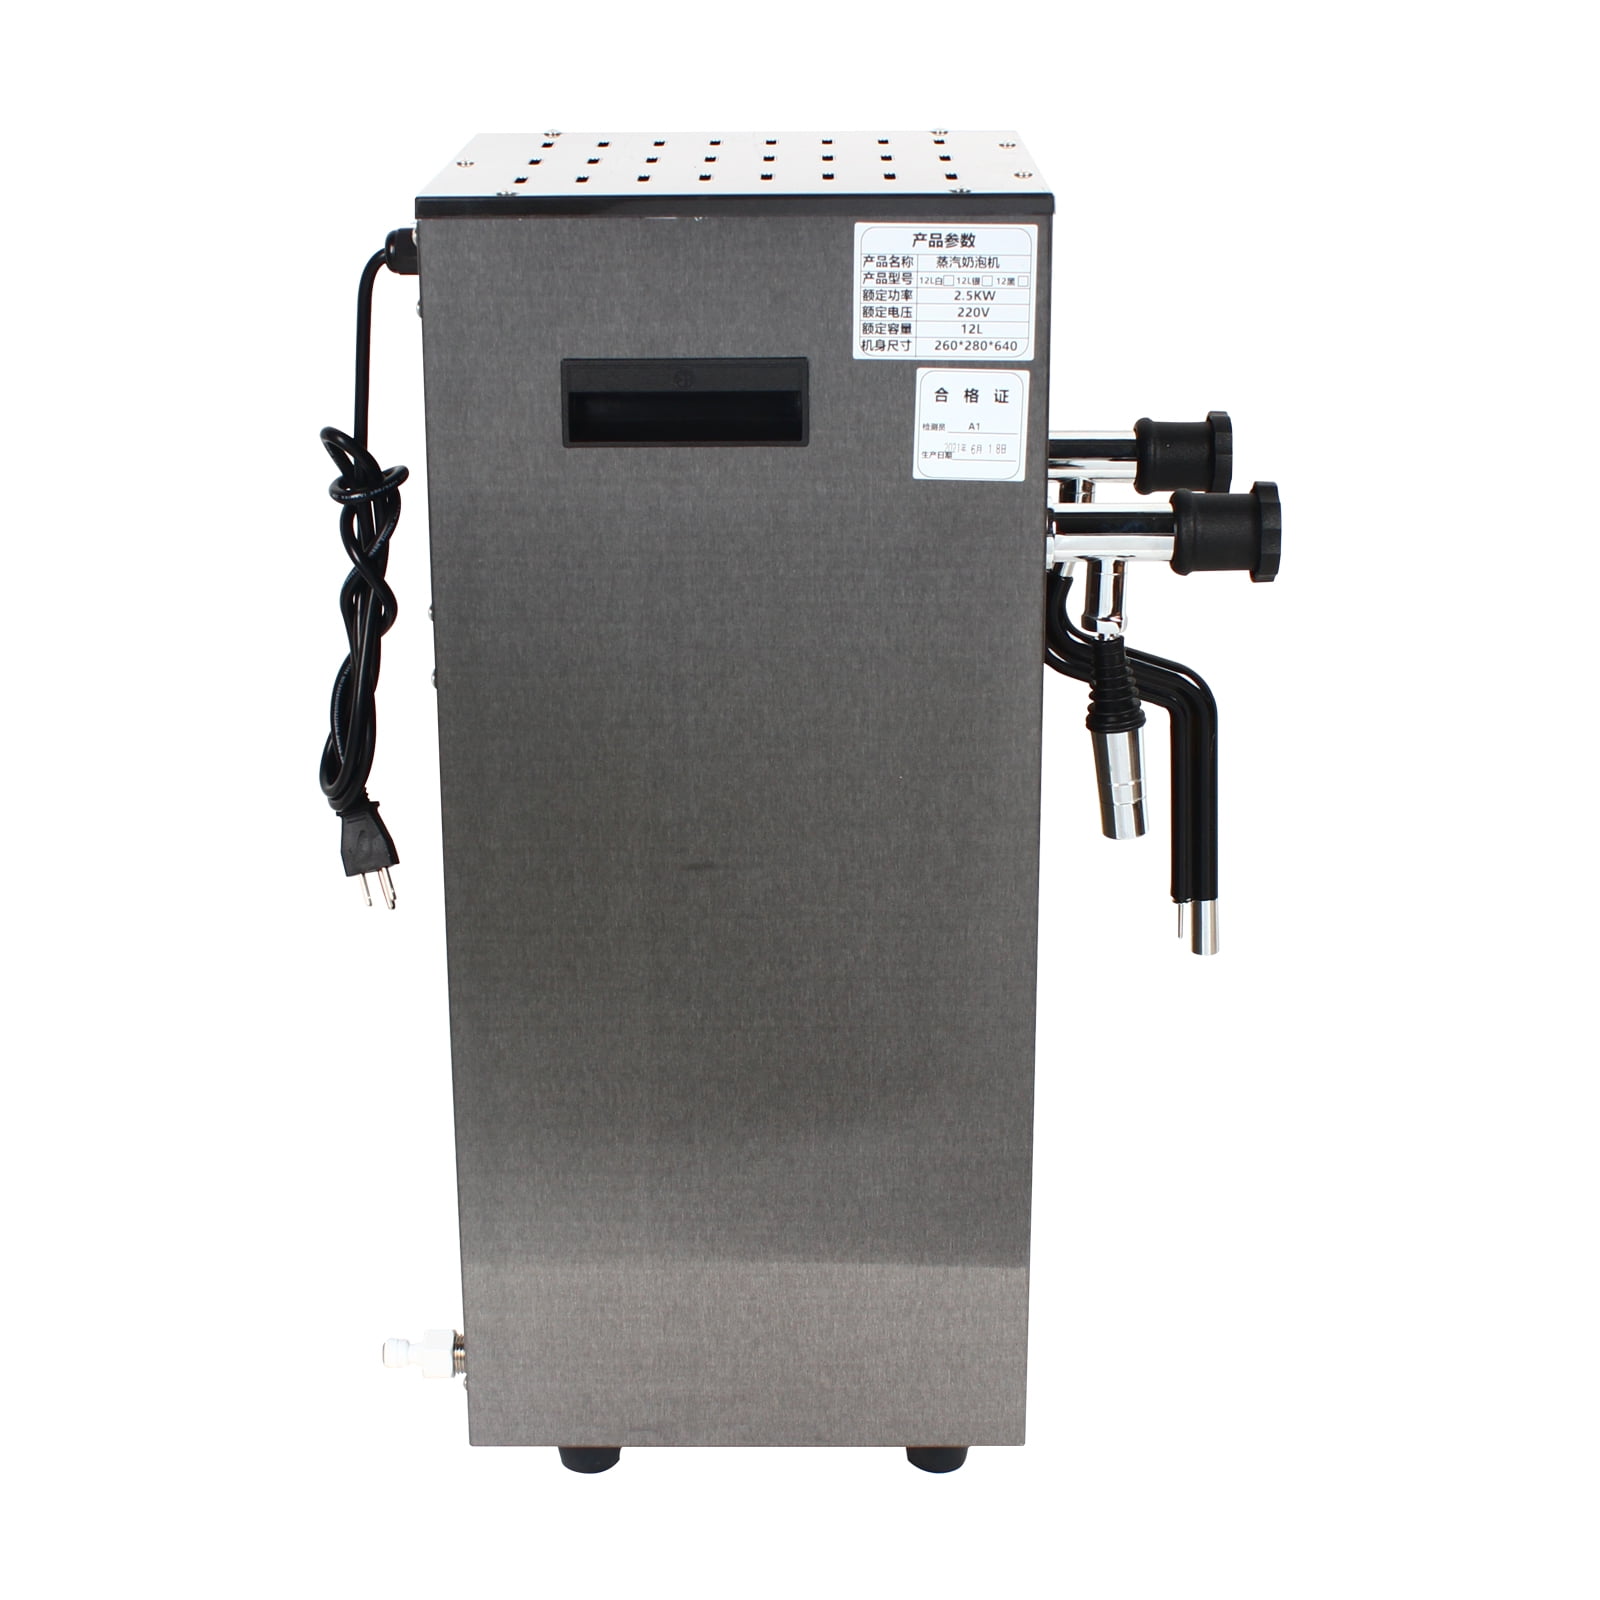 Commercial Milk Frother Large Capacity Milk Foam Machine Coffee Maker Steam  Machine From Zhenghzouaiyao002, $462.31